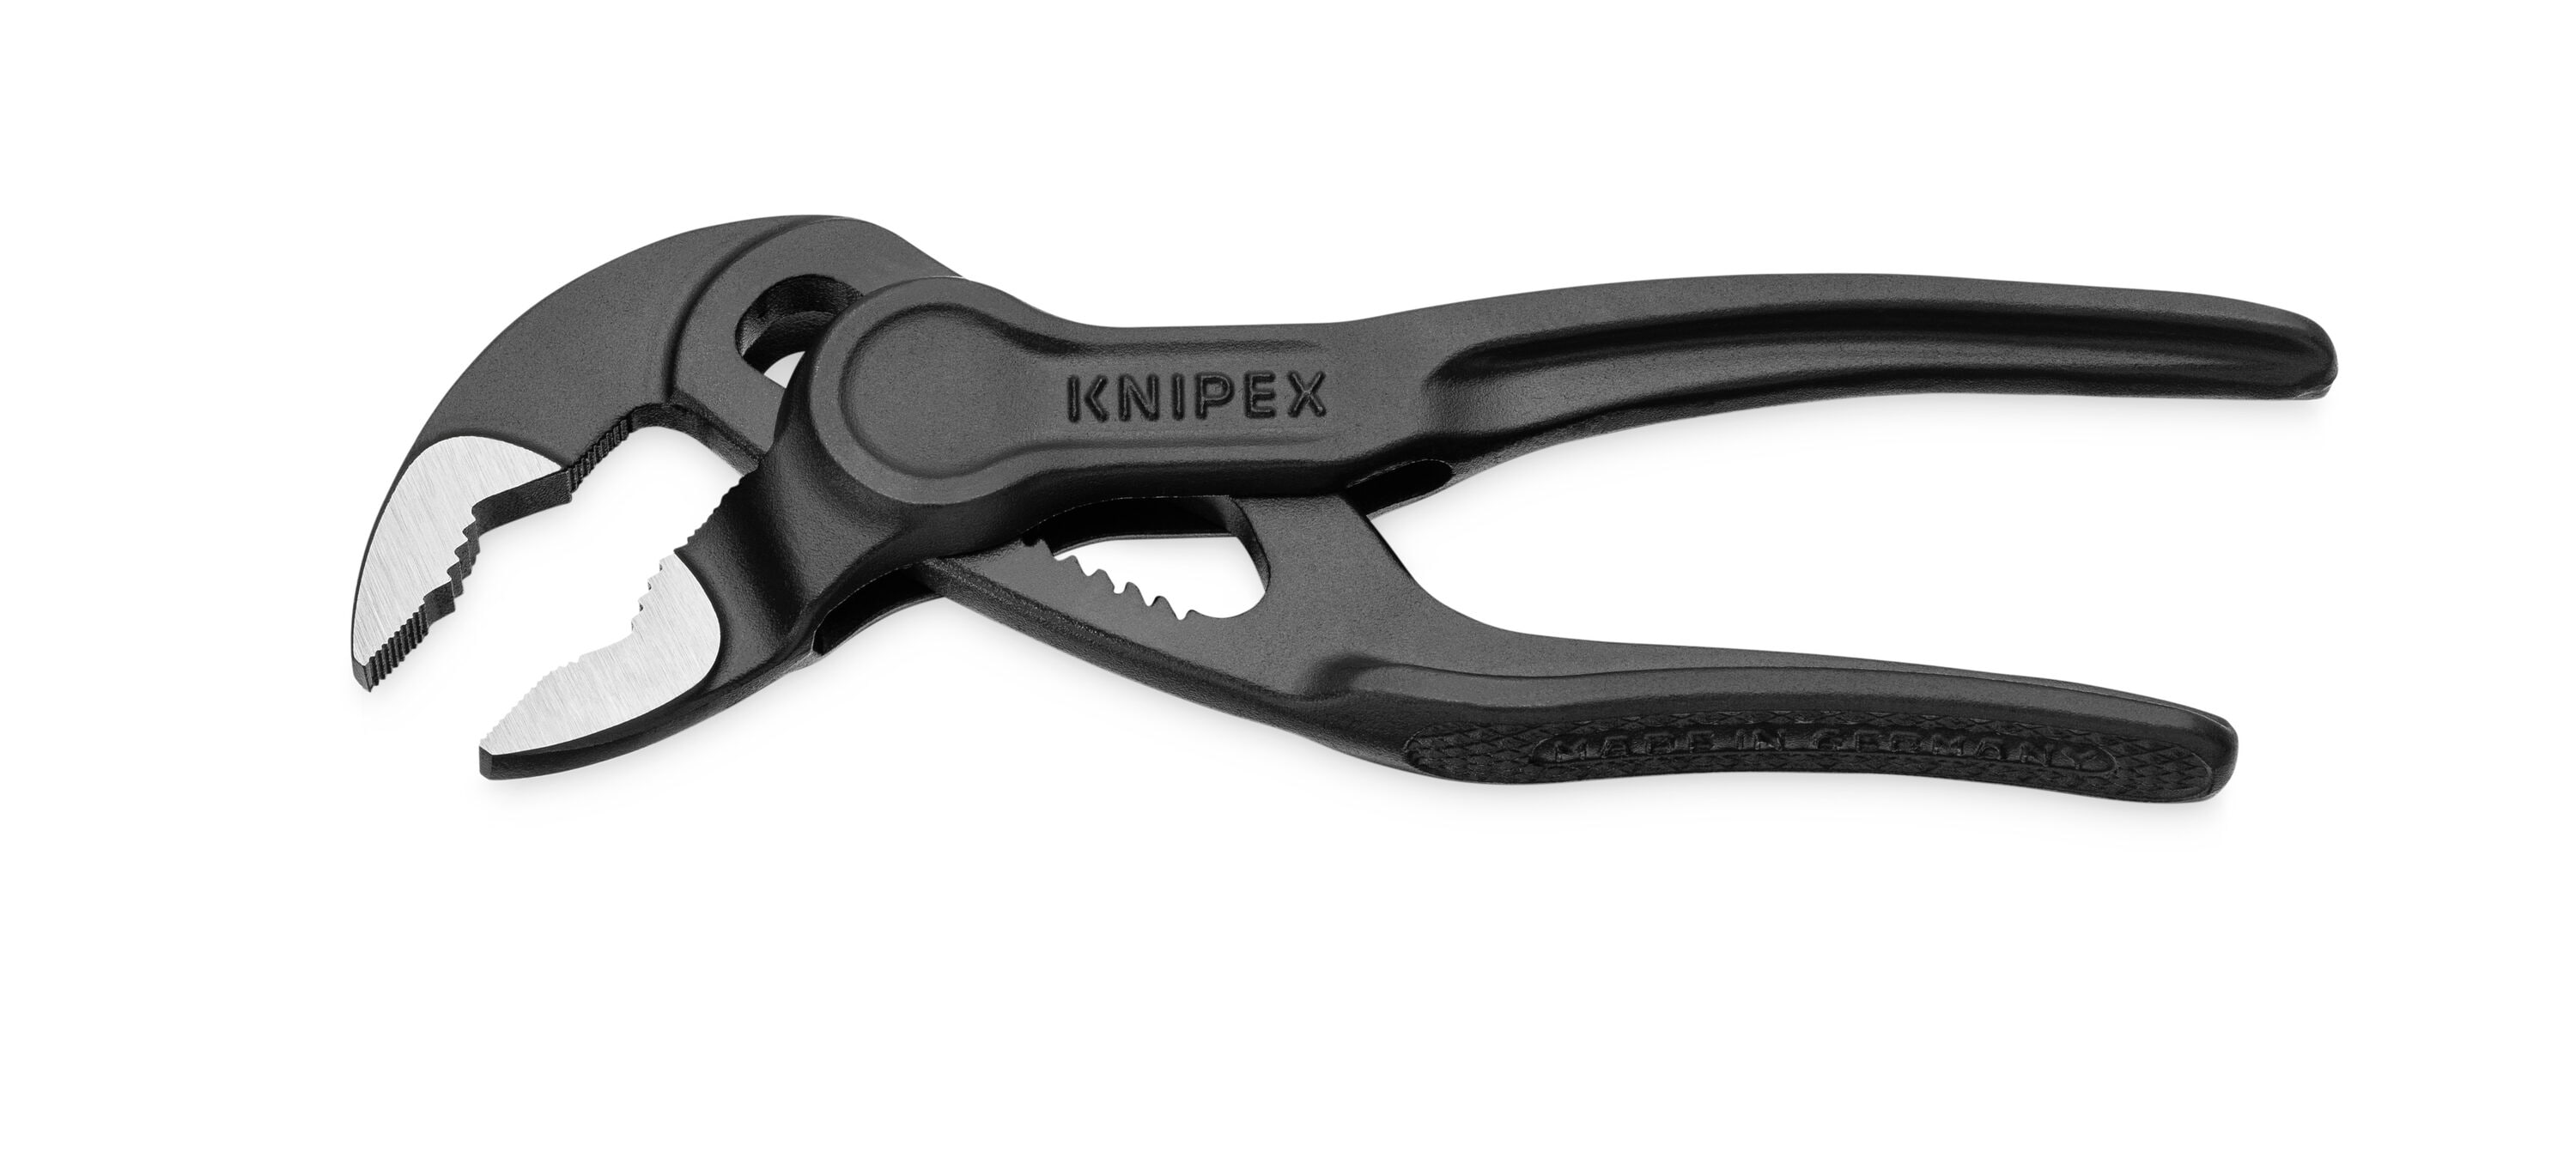 KNIPEX 4-in Universal Tongue and Groove Pliers in the Pliers